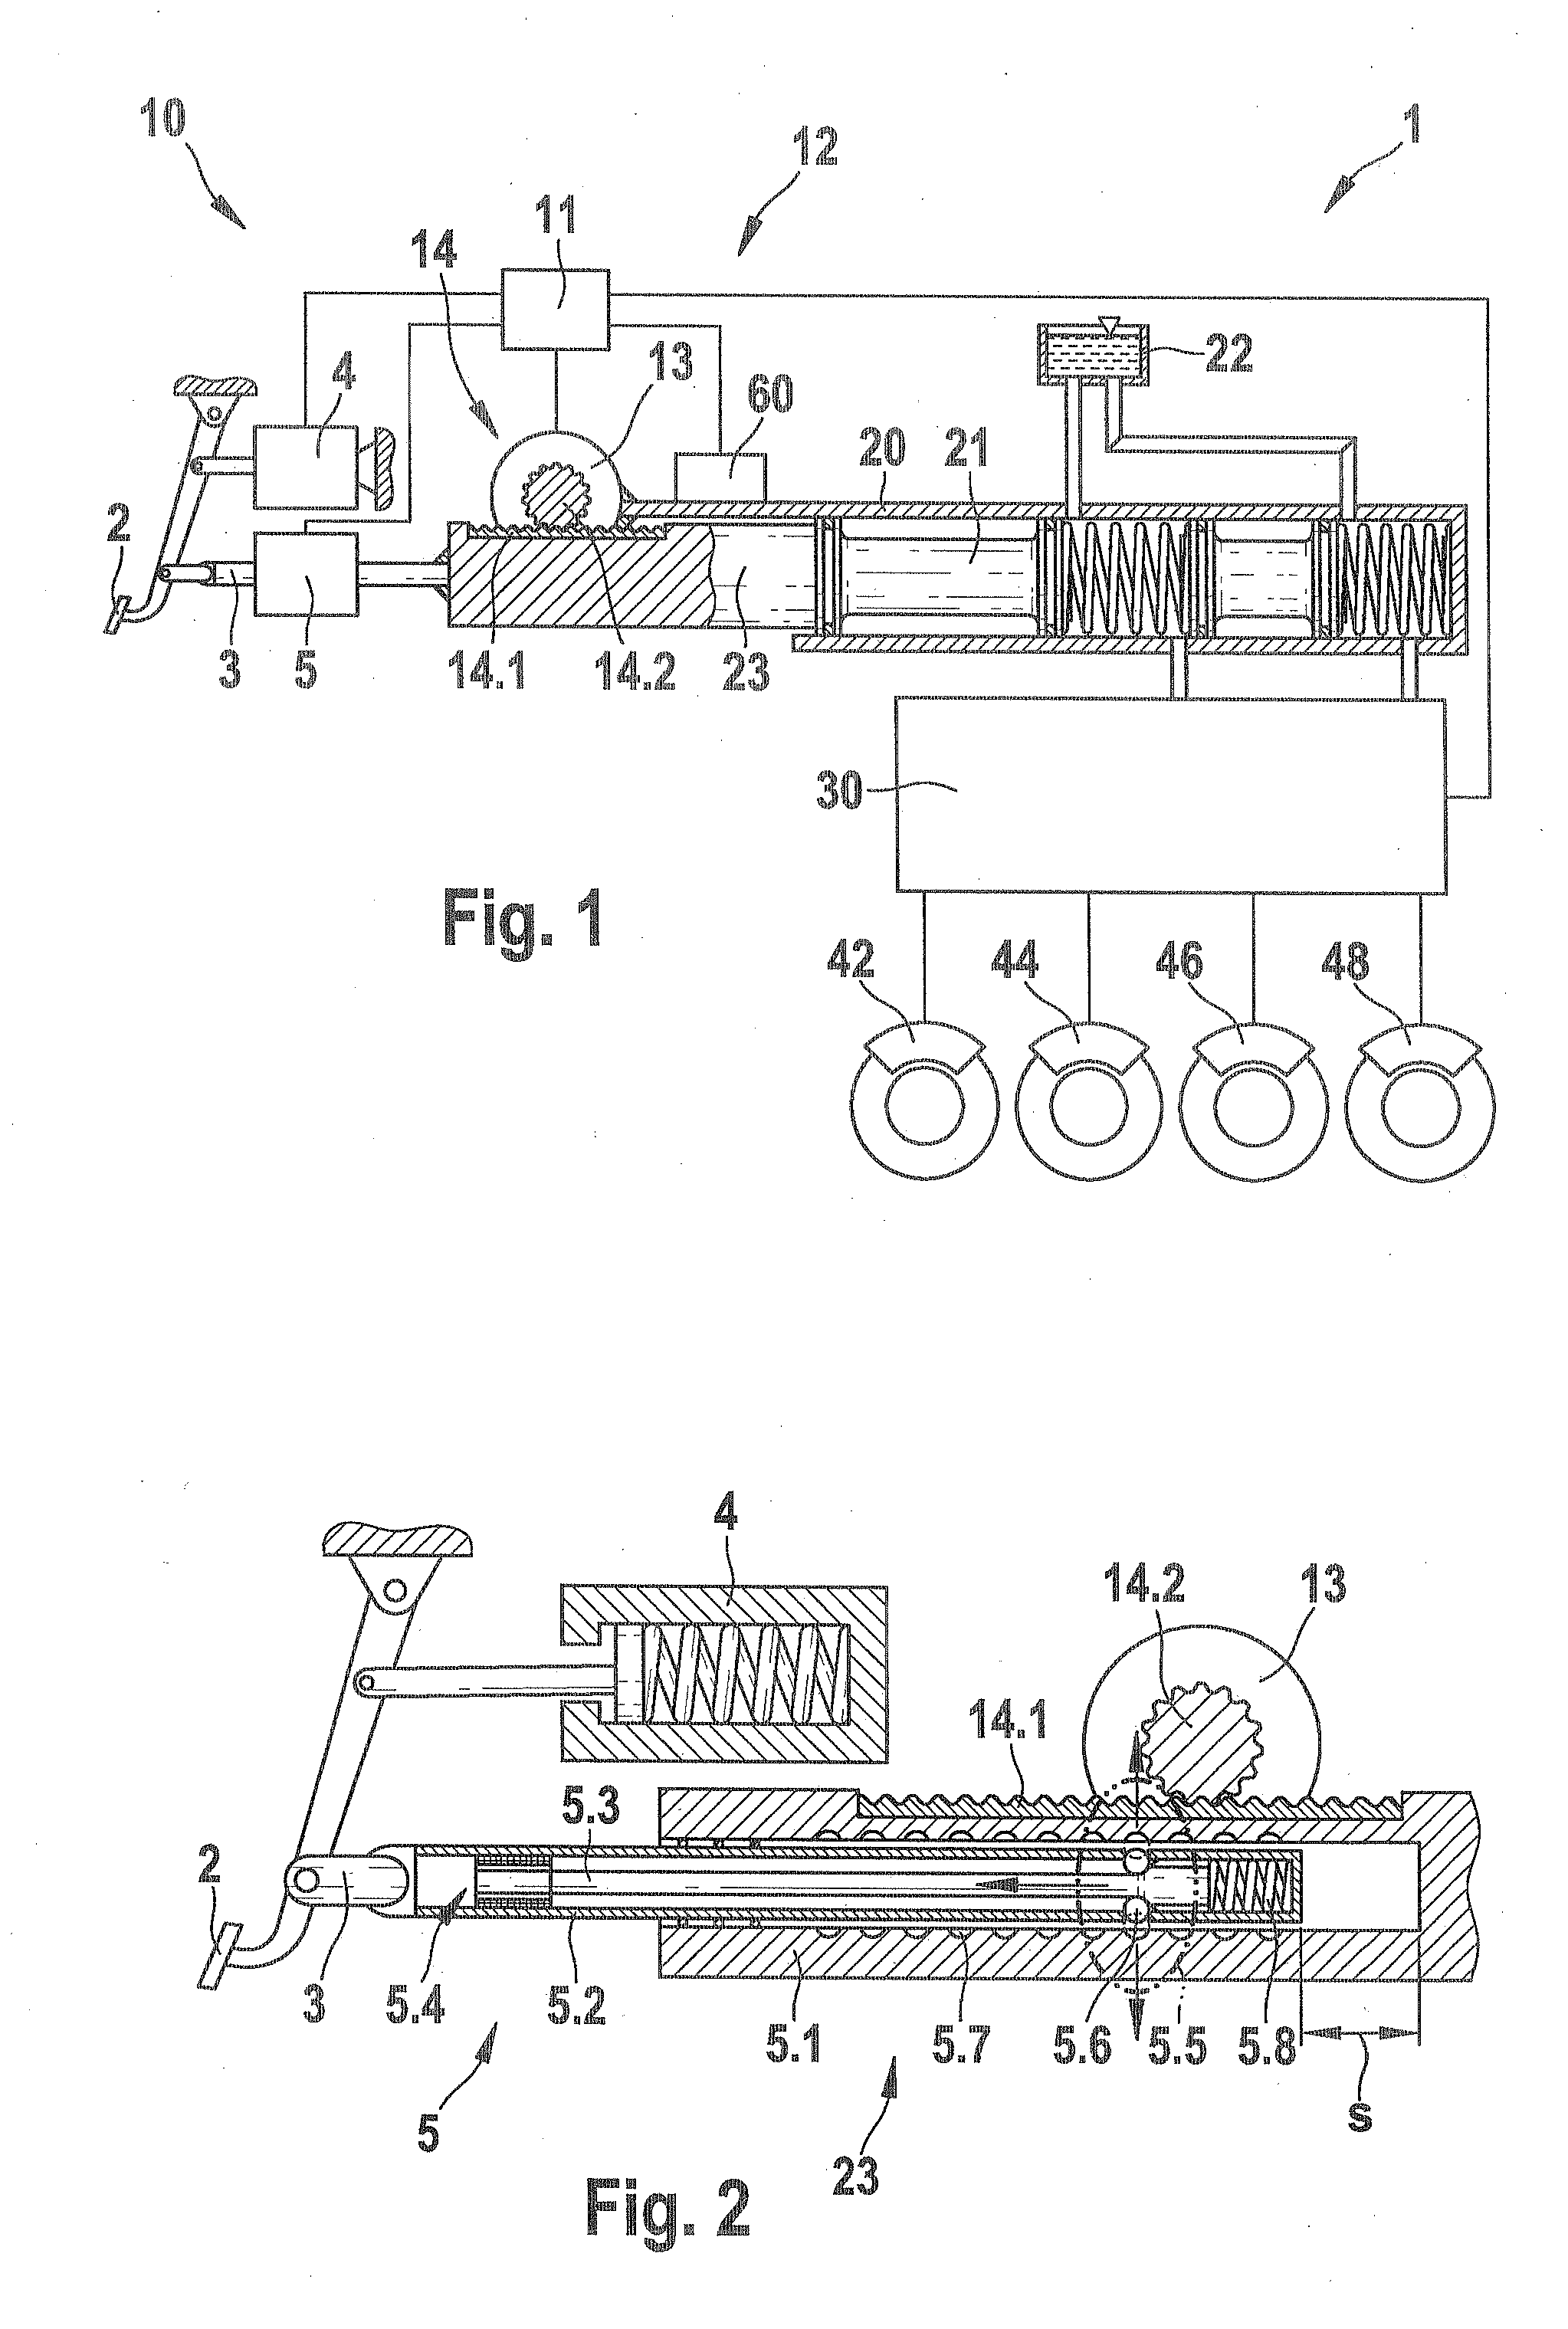 Brake system for a vehicle